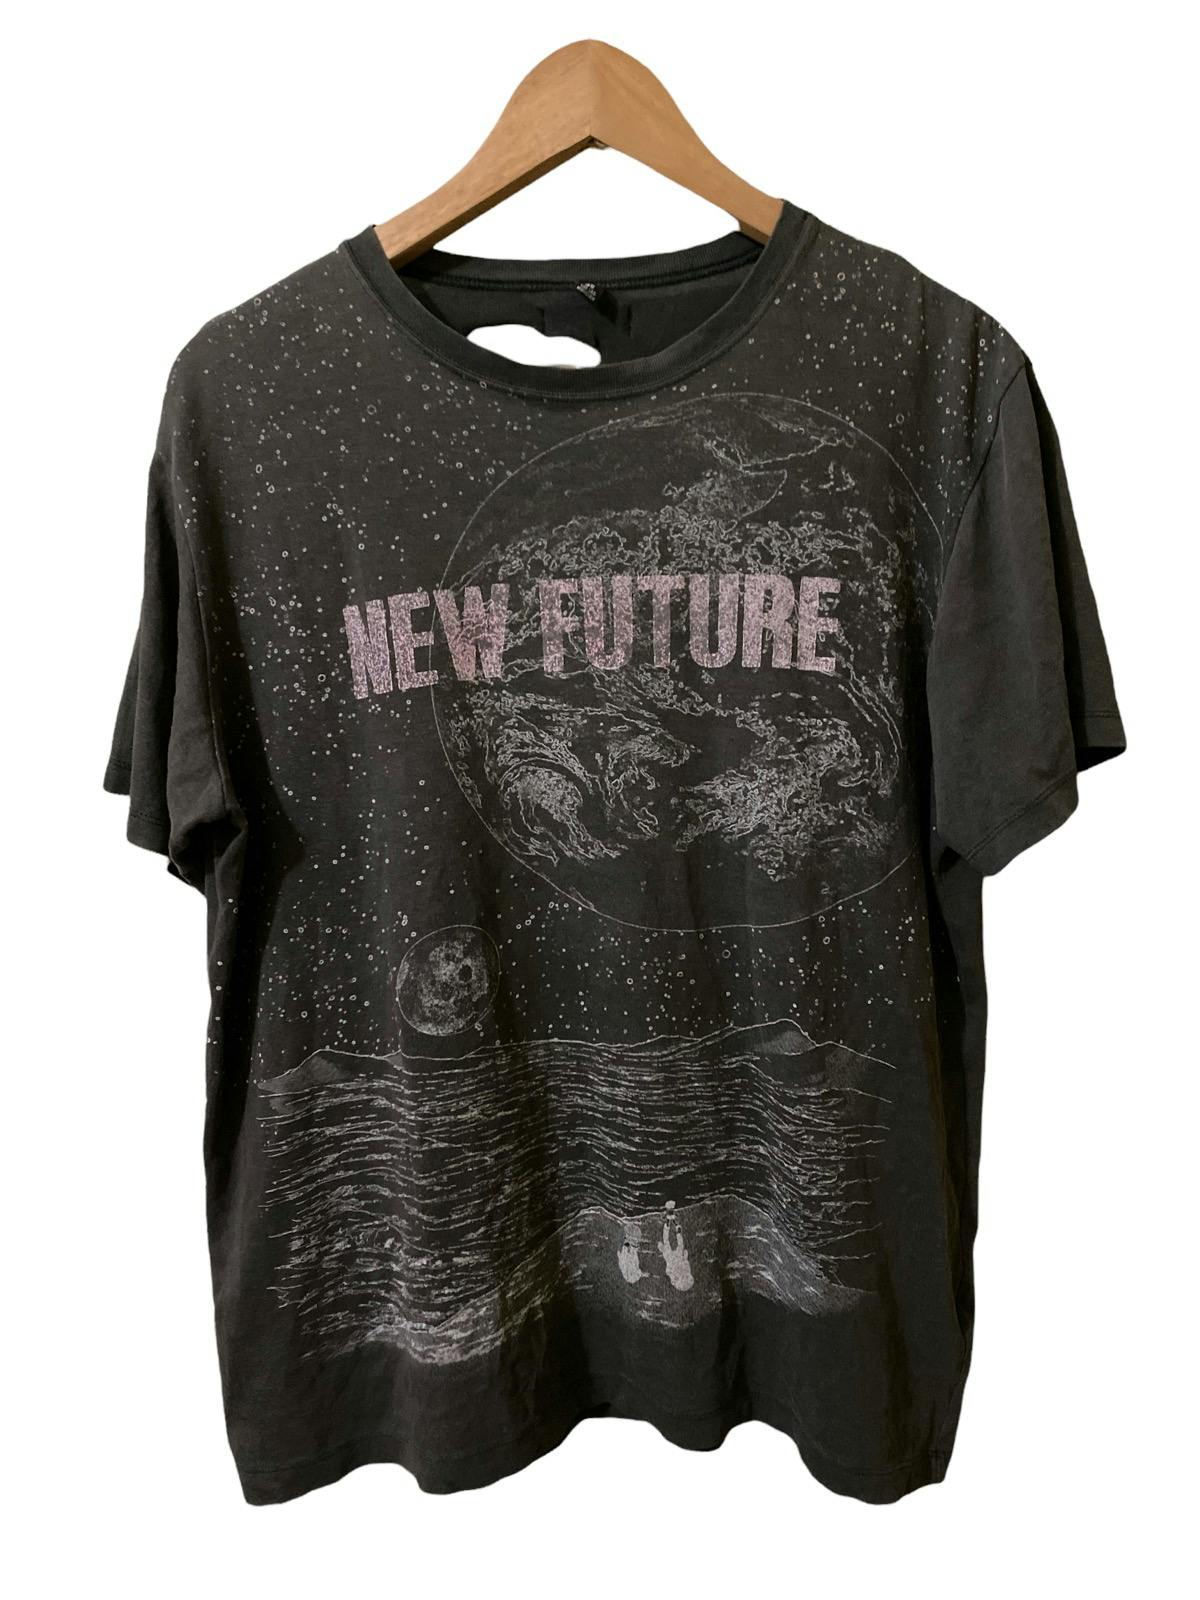 New Future Distressed The Lad Musician size 46 - 1